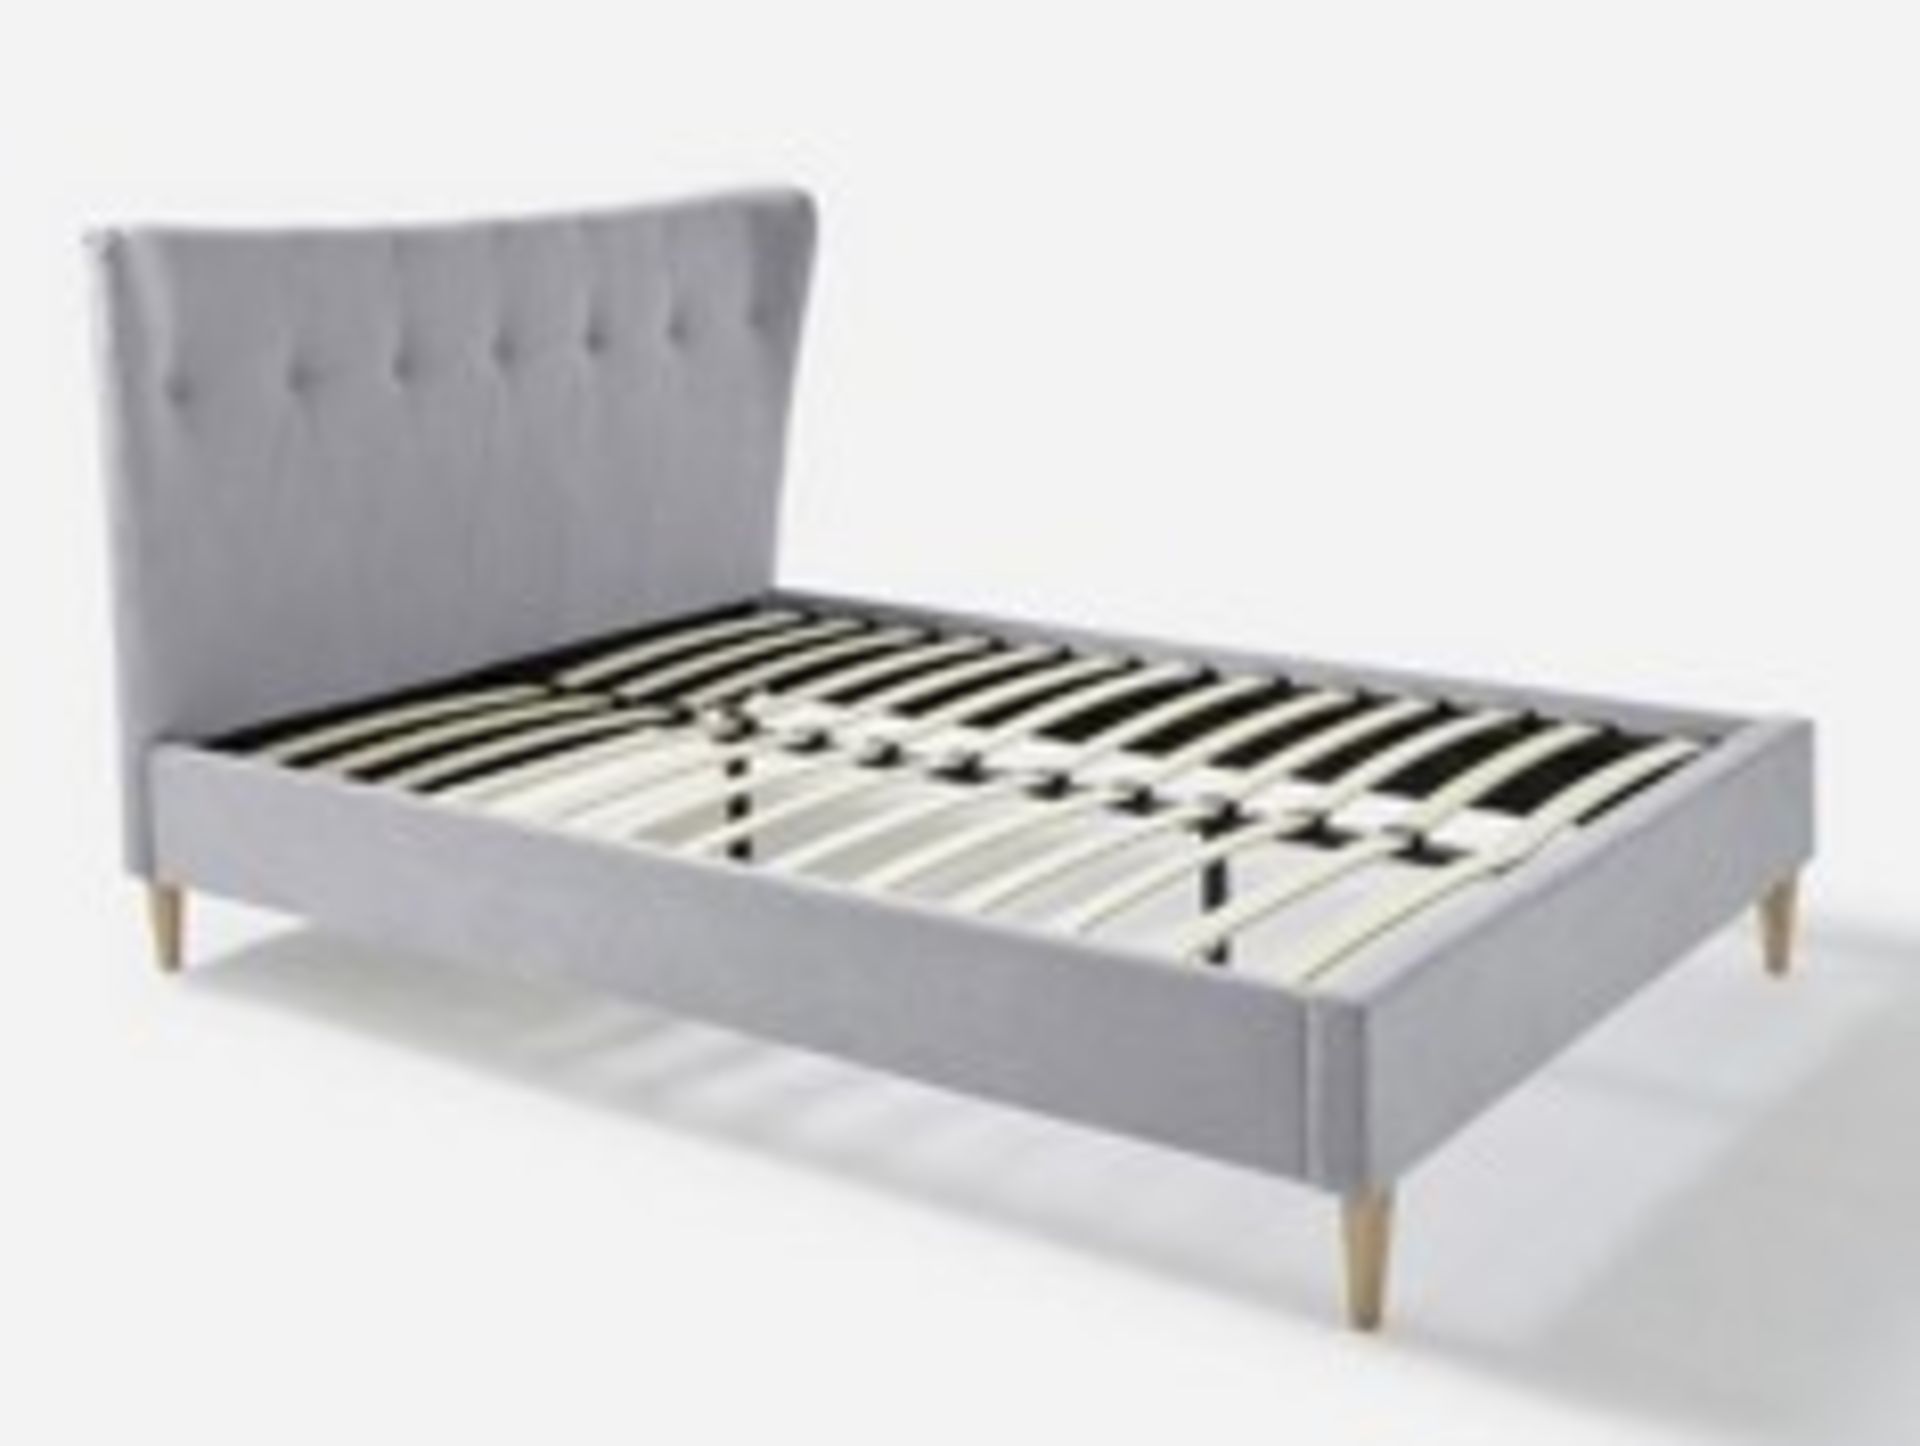 Brand New Kingsize Aviana Bed Frame, The Aviana Fabric Bed Frame features an upholstered bedframe